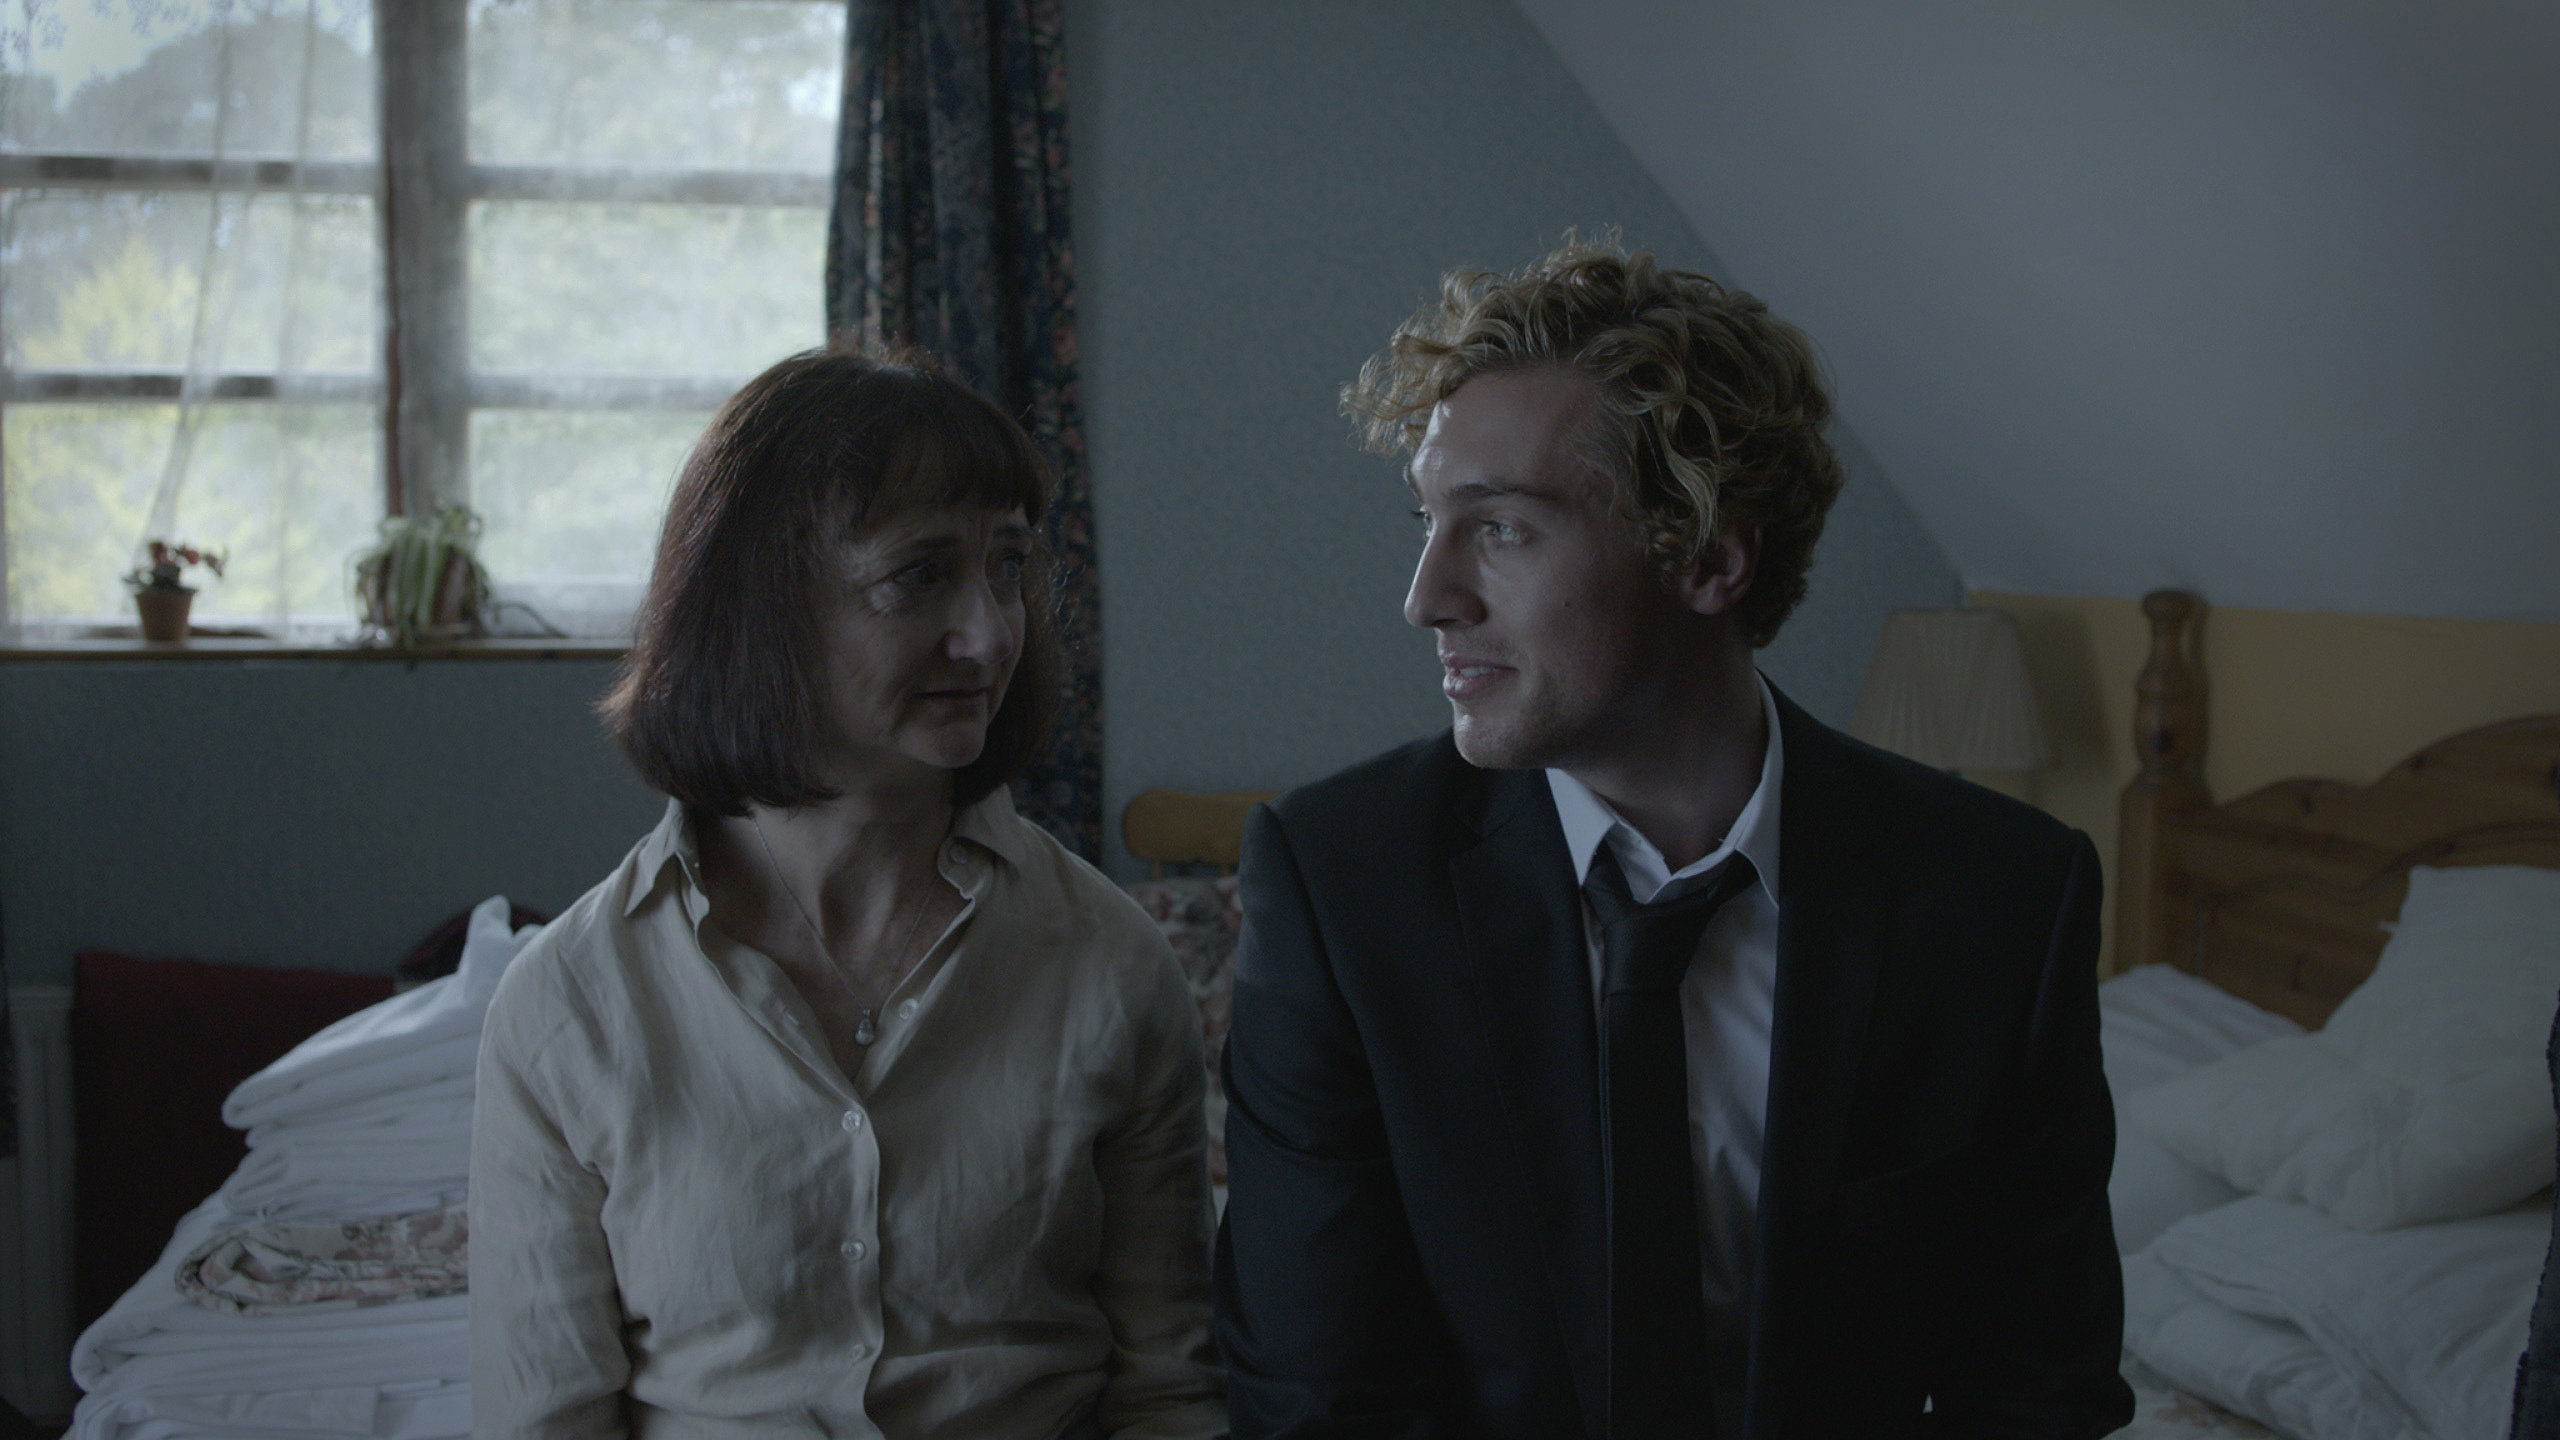 Still of Bairbre Ní Chaoimh, Rory Fleck-Byrne and B. Welby-Delimere in Bodies (2015)